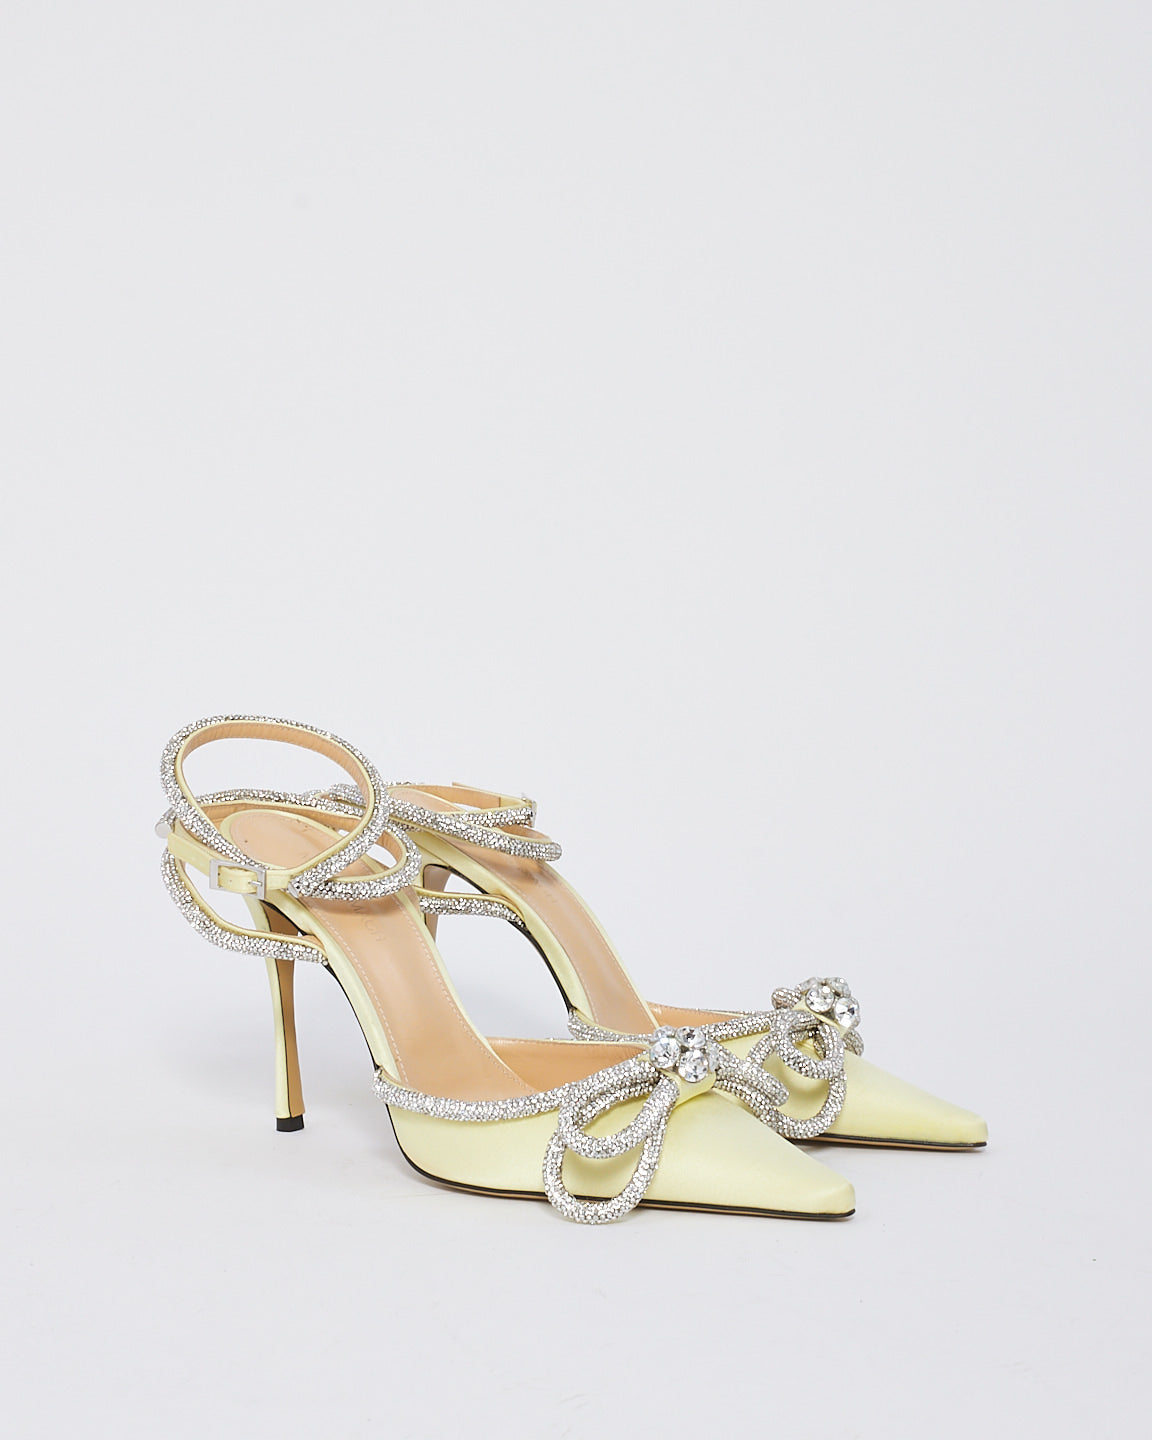 Mach & Mach Yellow Satin Crystal Bow Accents Slingback Pumps -40